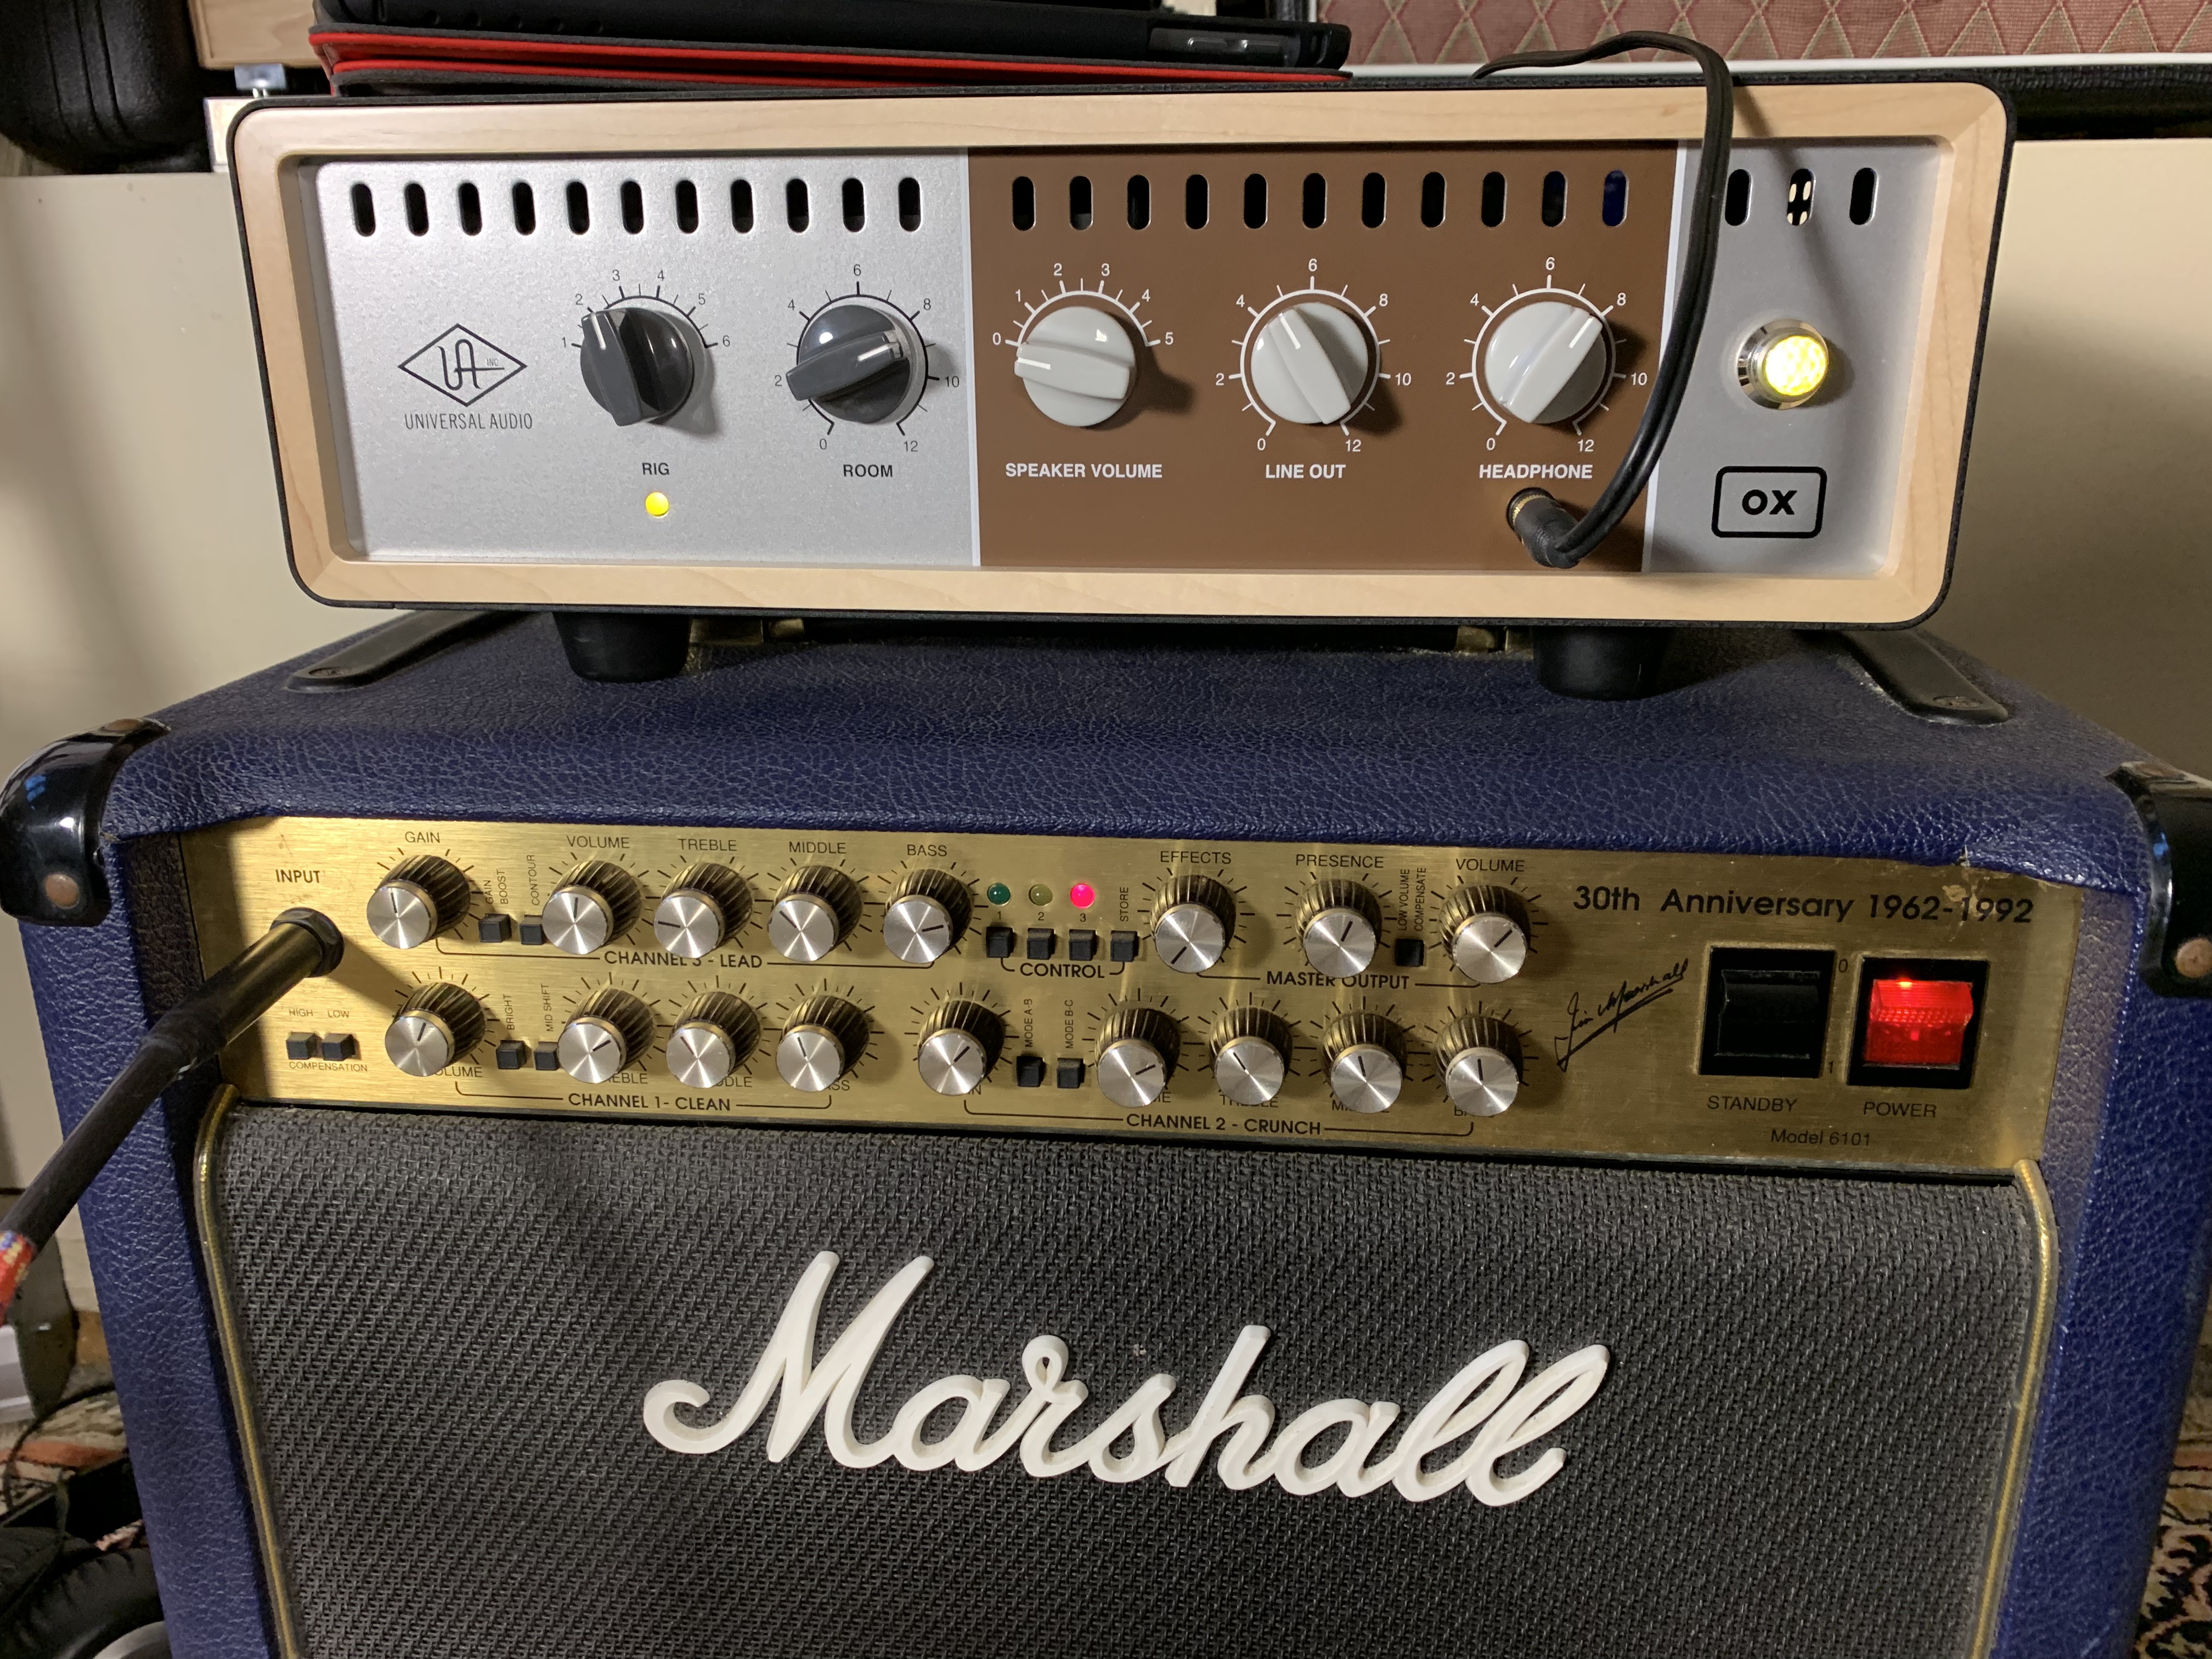 Gear Review - OX Amp Top Box Universal Audio / Marshall 6101 amp